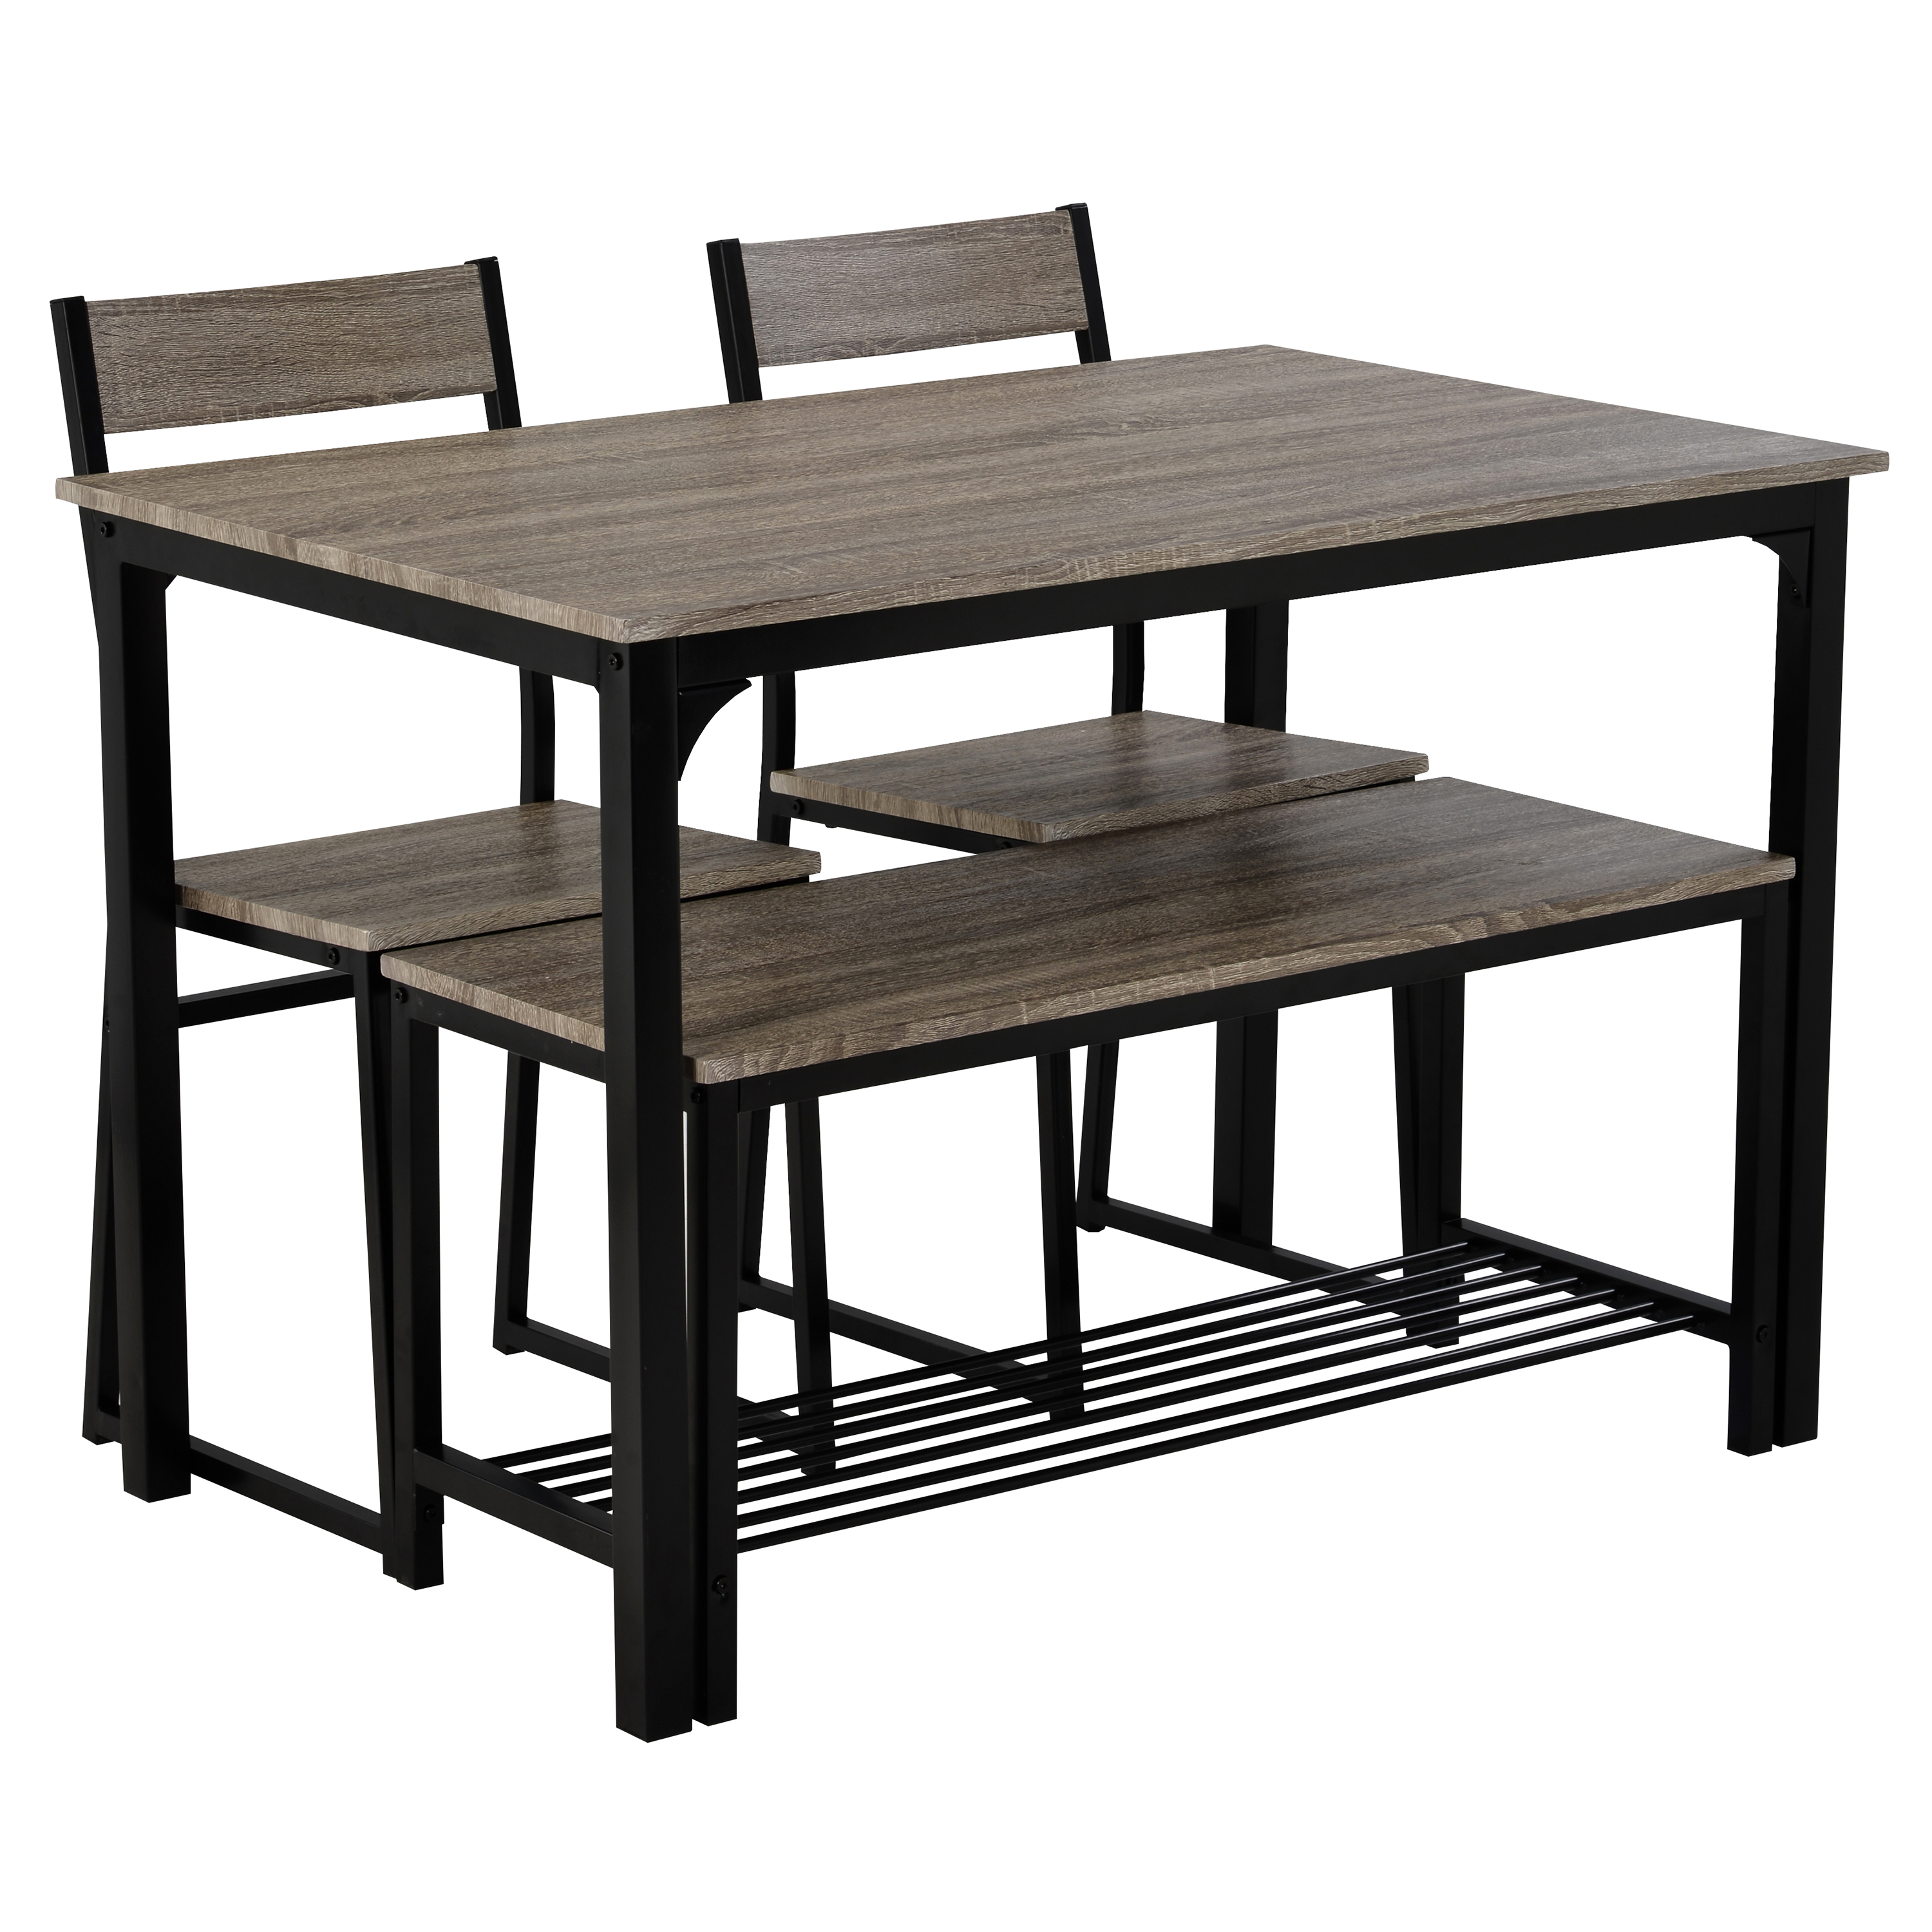 4 Piece Dining Set for 4 Kitchen Table Set Computer Desk with 2 Chairs and Bench for Home Dining Room, Gray-Boyel Living